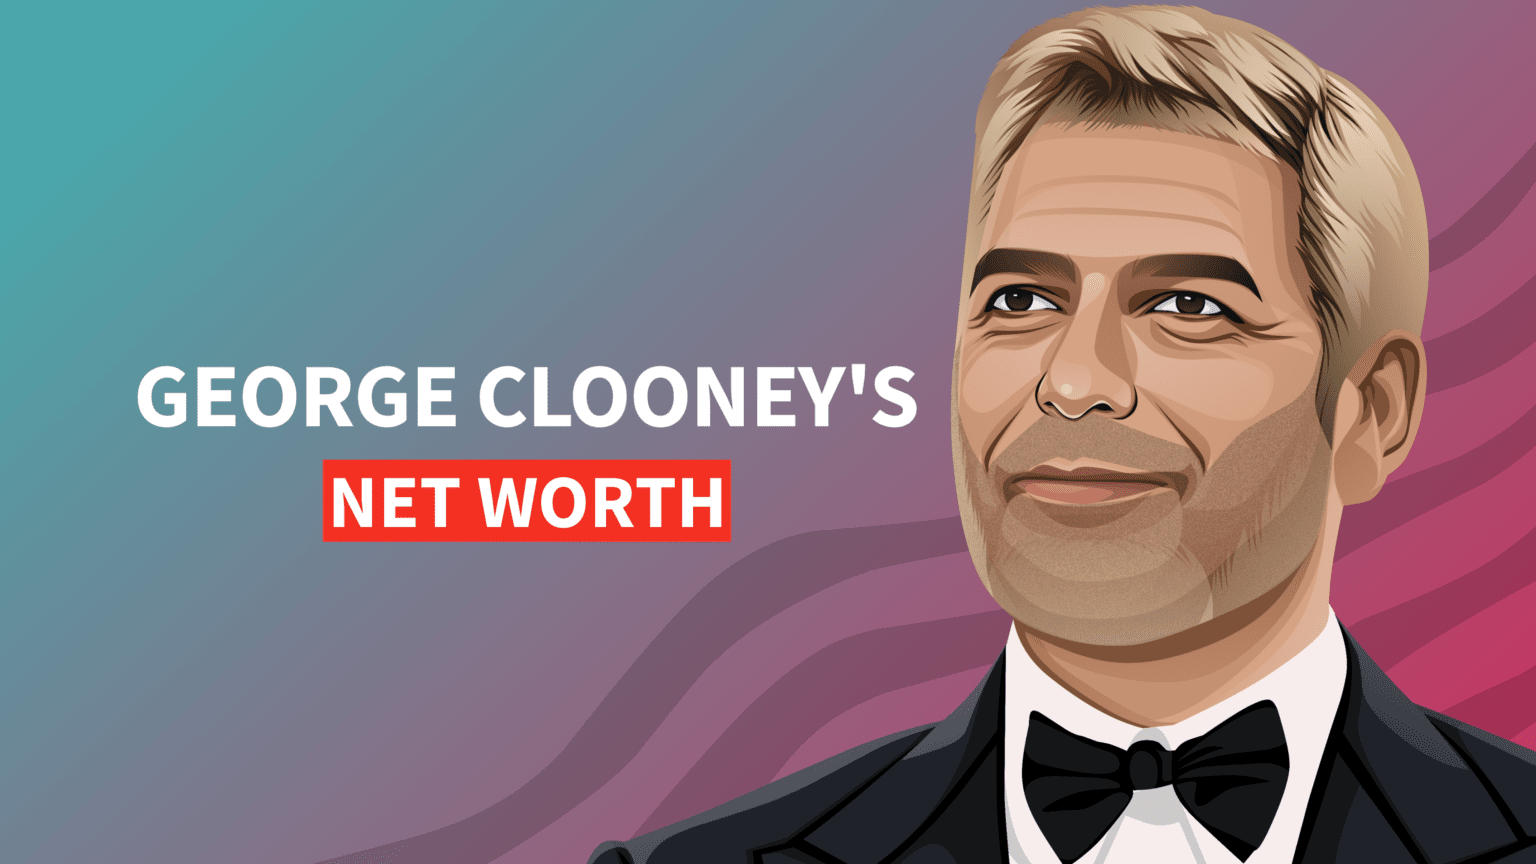 George Clooney's Net Worth and Inspiring Story